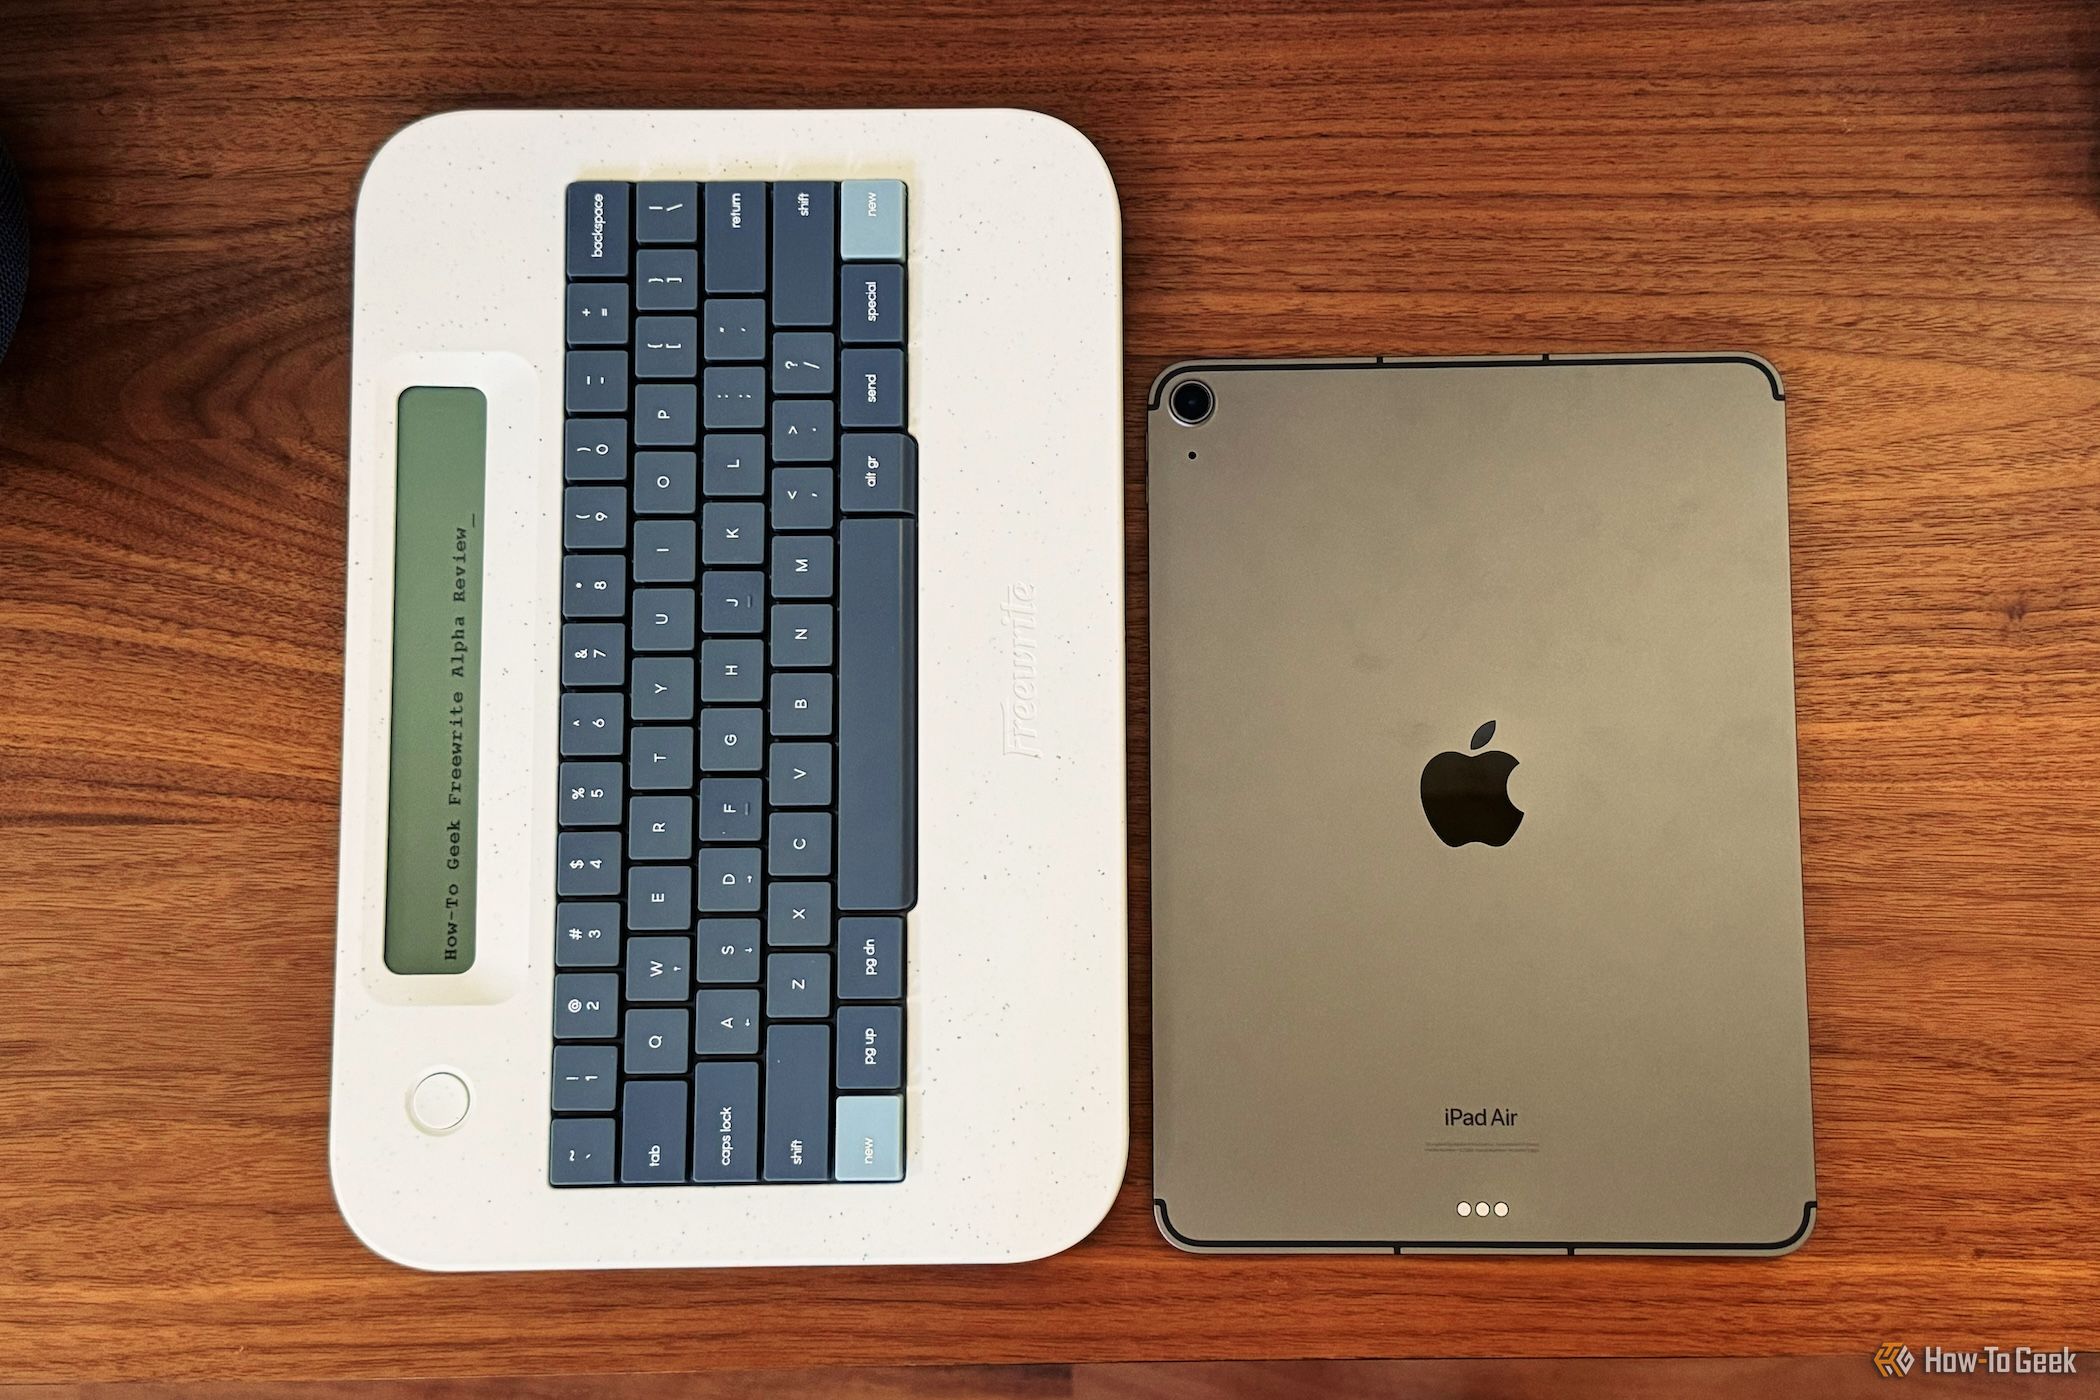 Freewrite Alpha on the left next to an iPad Air